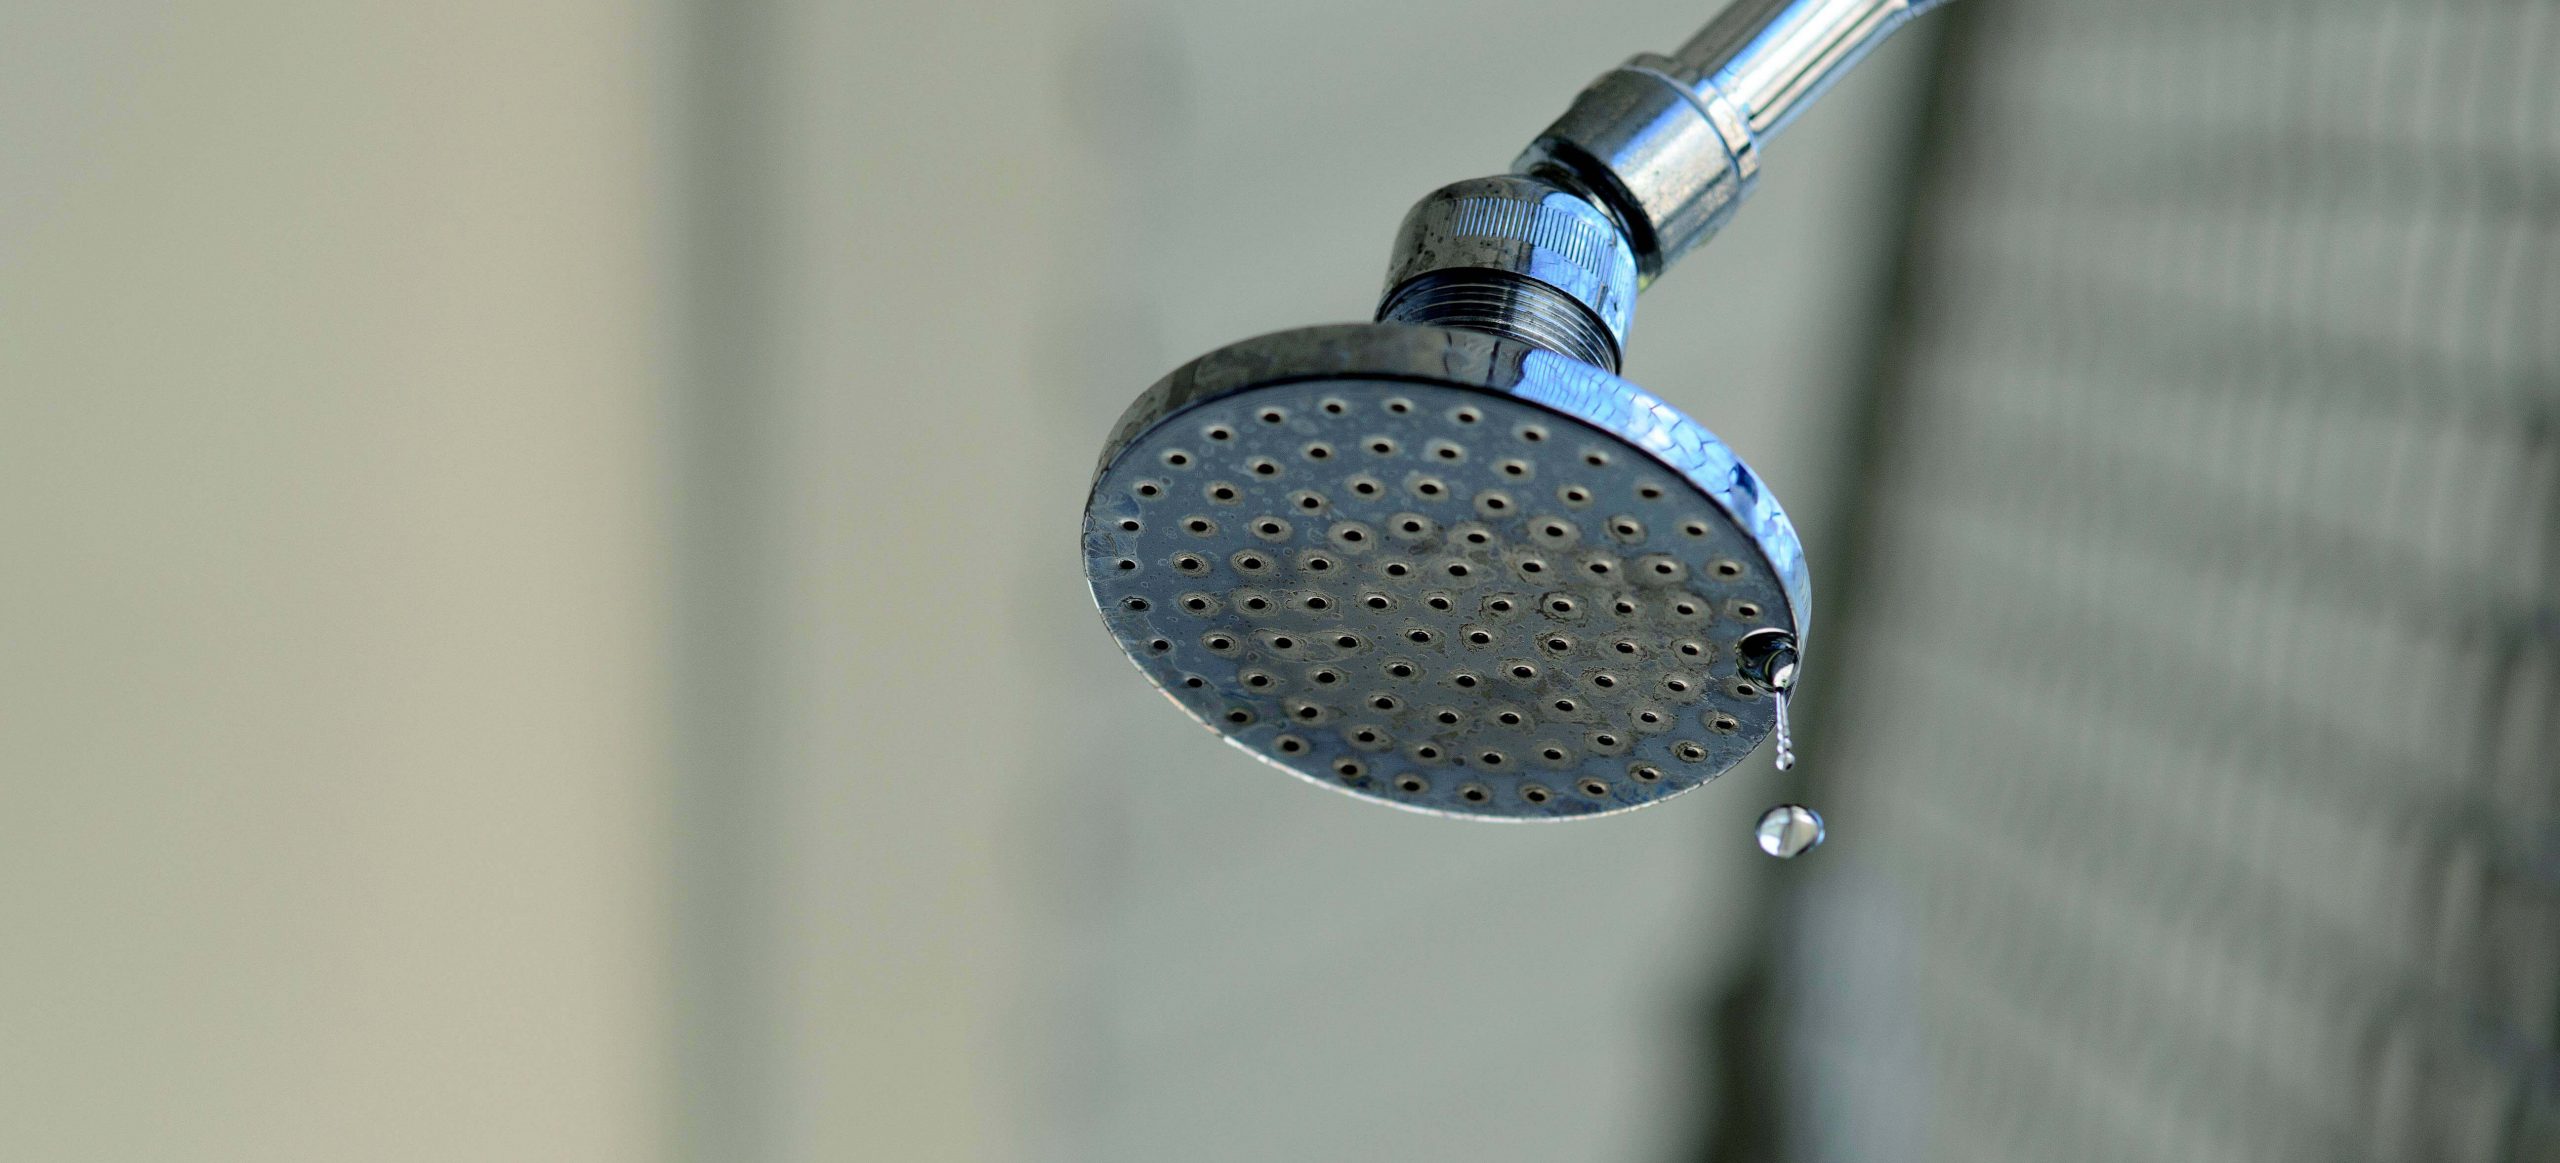 Leaking Shower - 24 Causes and Solutions  My Plumber